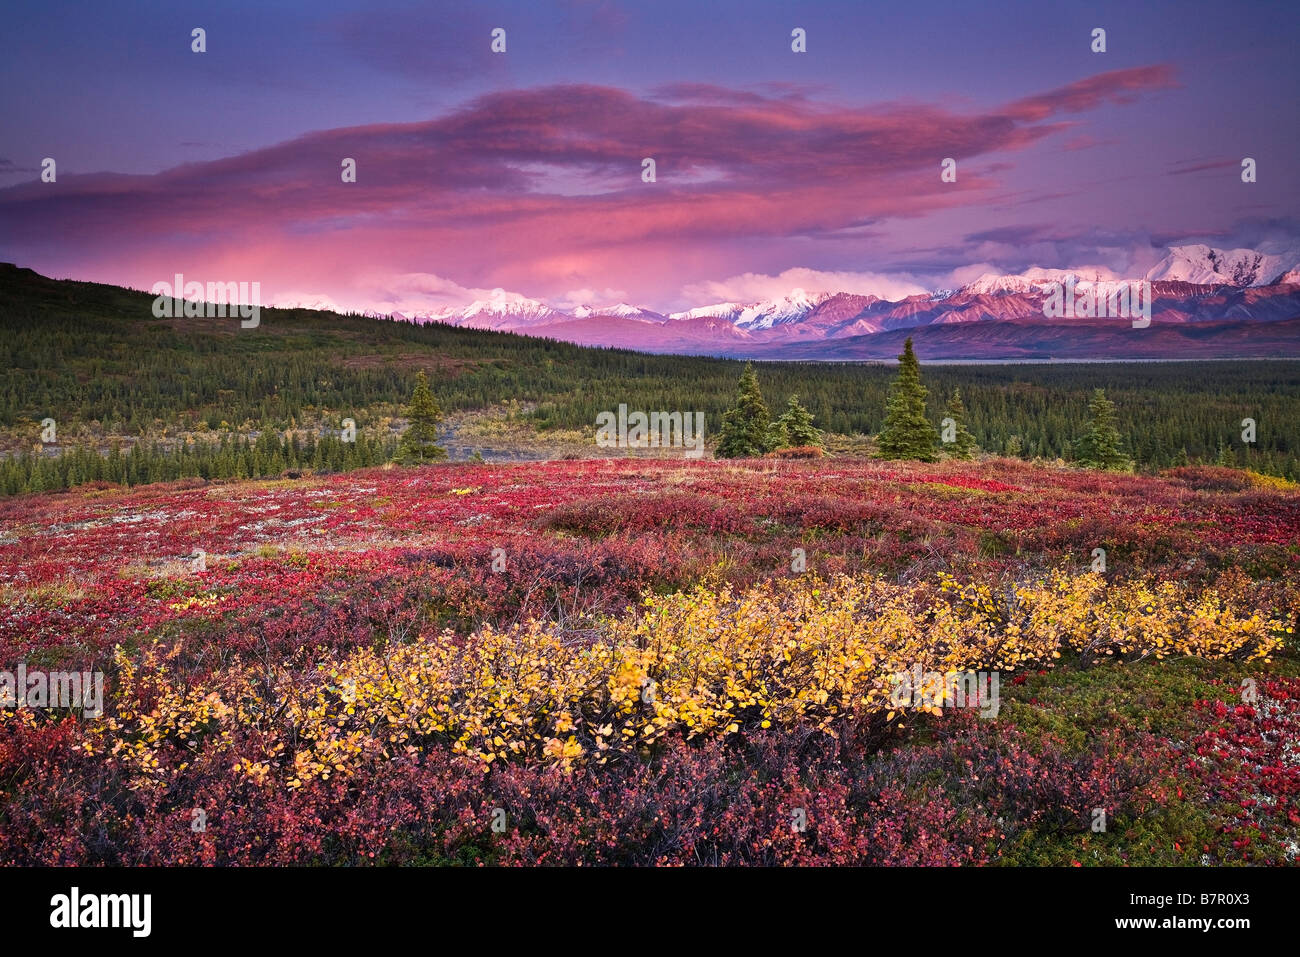 Scenic view of alpine tundra with Alaska Range in the background with alpenglow at sunset in Denali National Park, Alaska Stock Photo